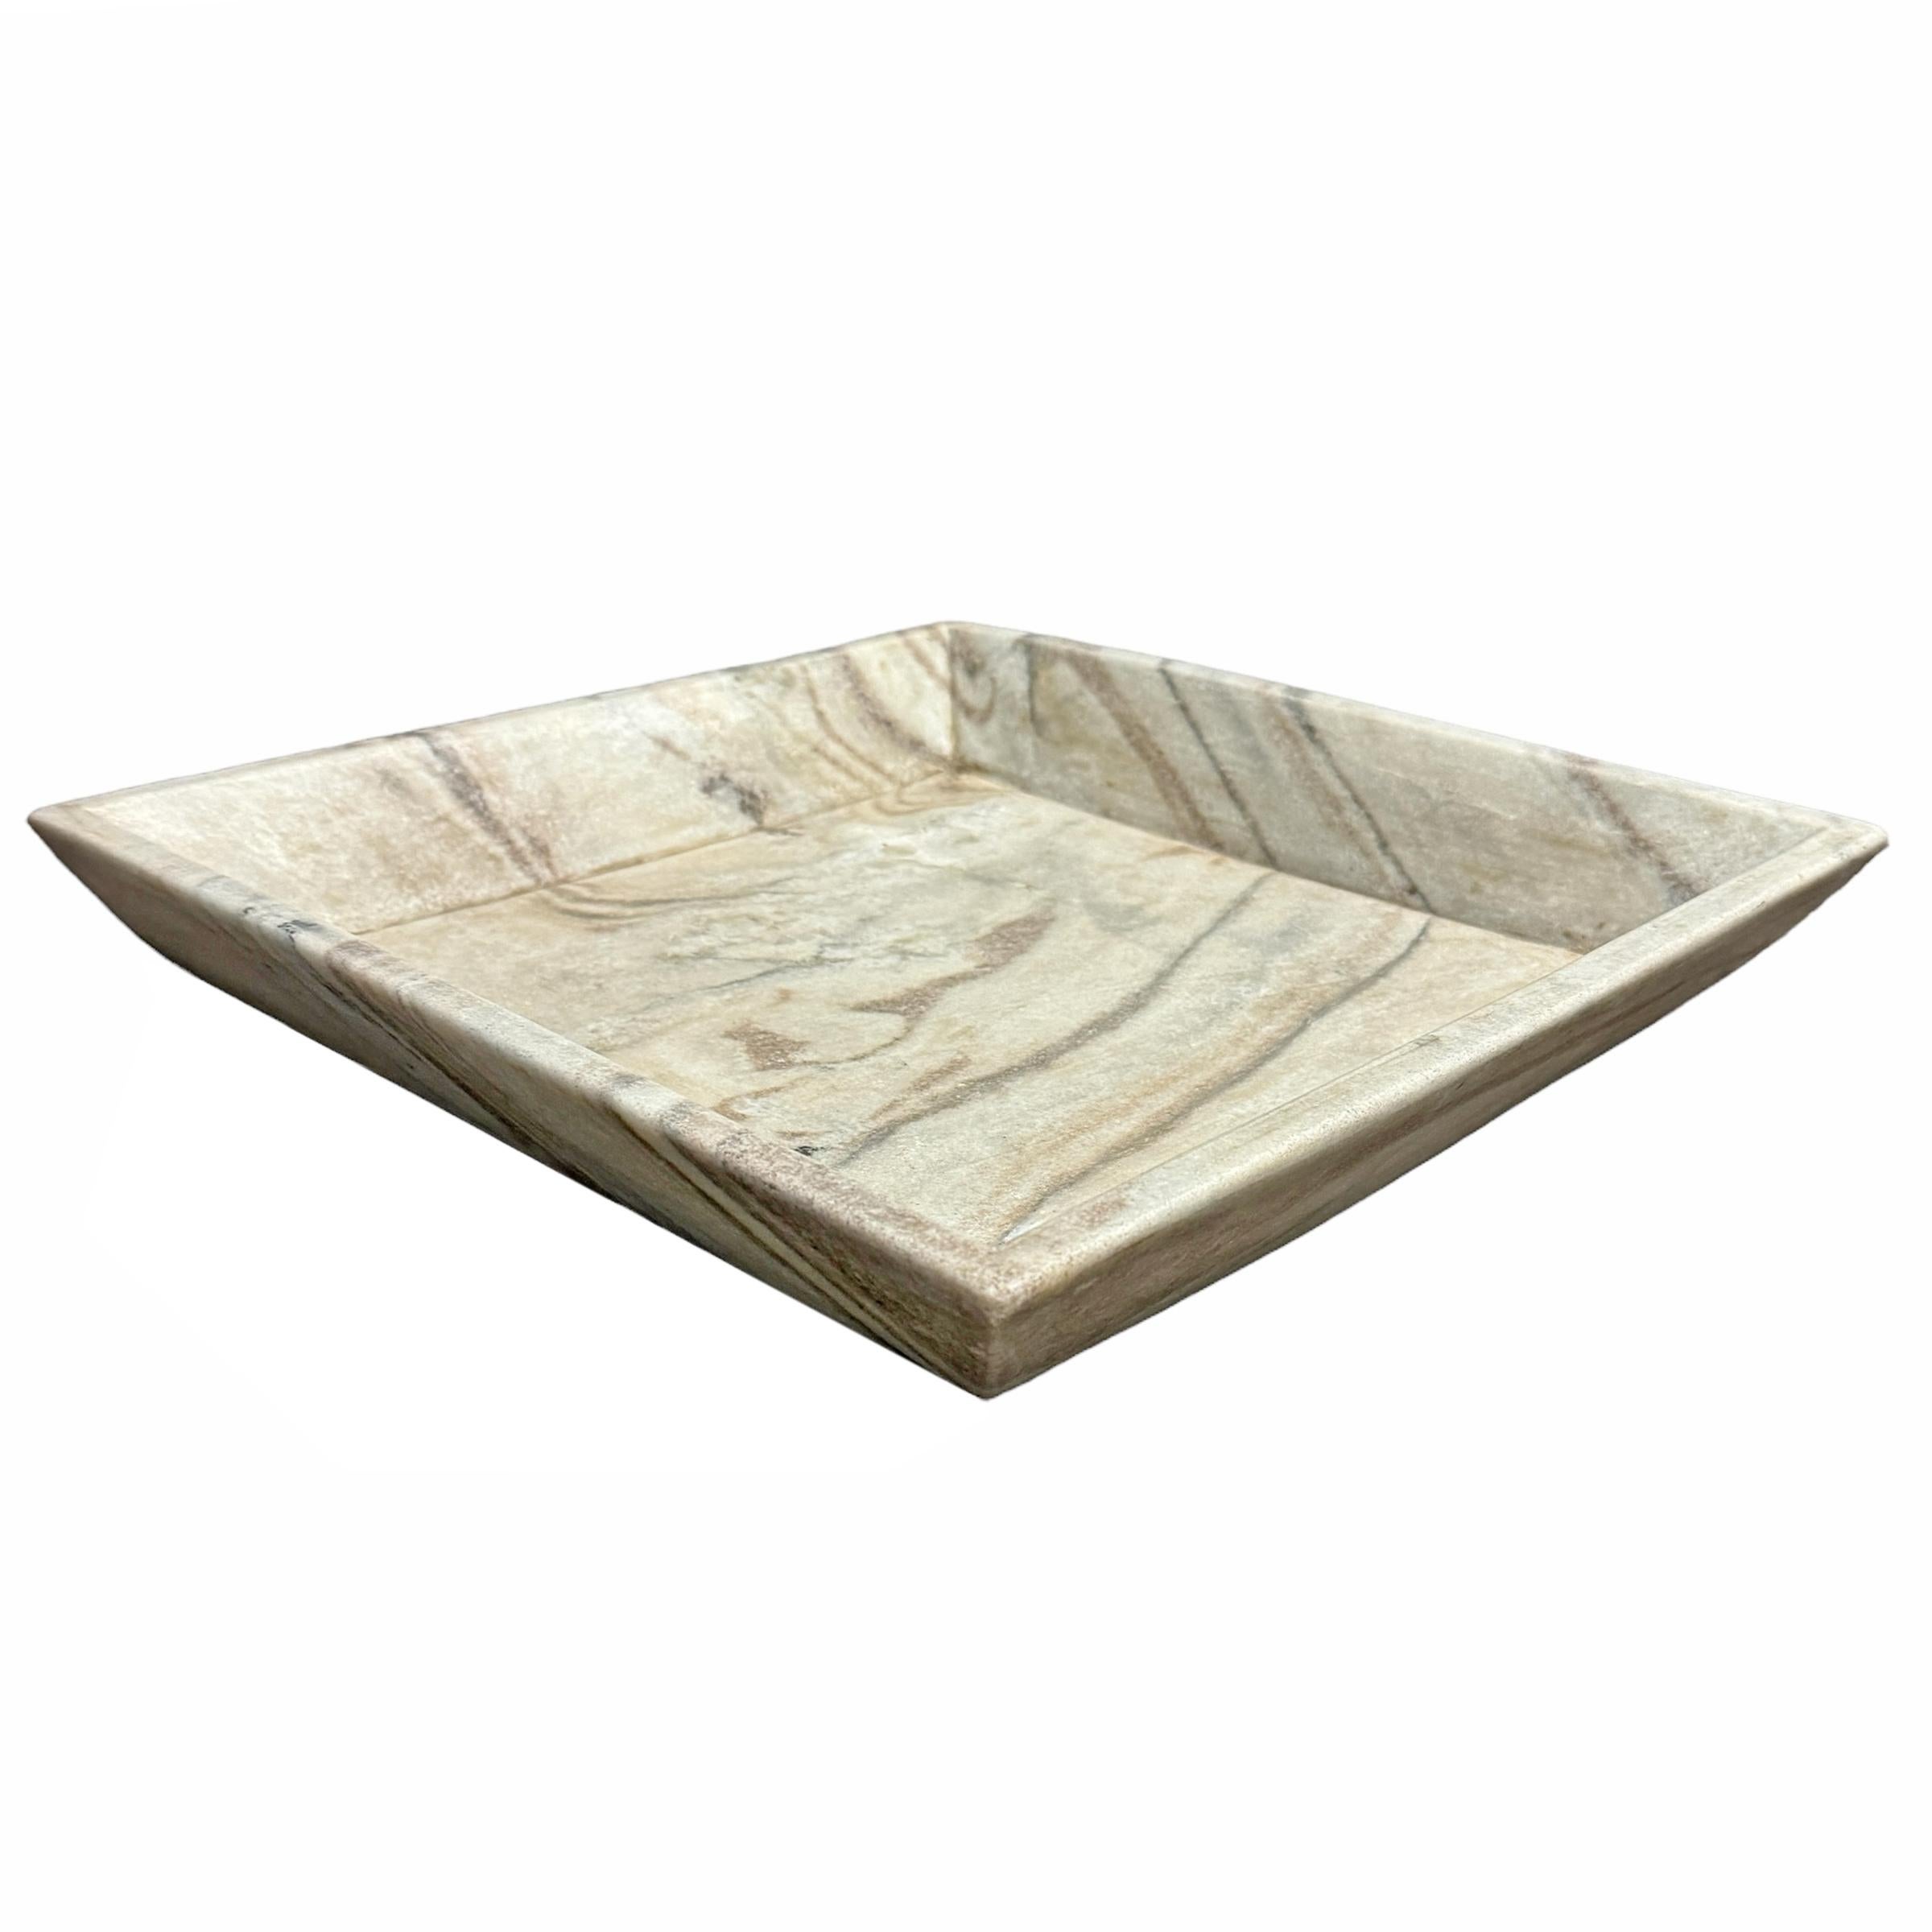 Hand-Carved Rather Large Carved Marble Tray For Sale